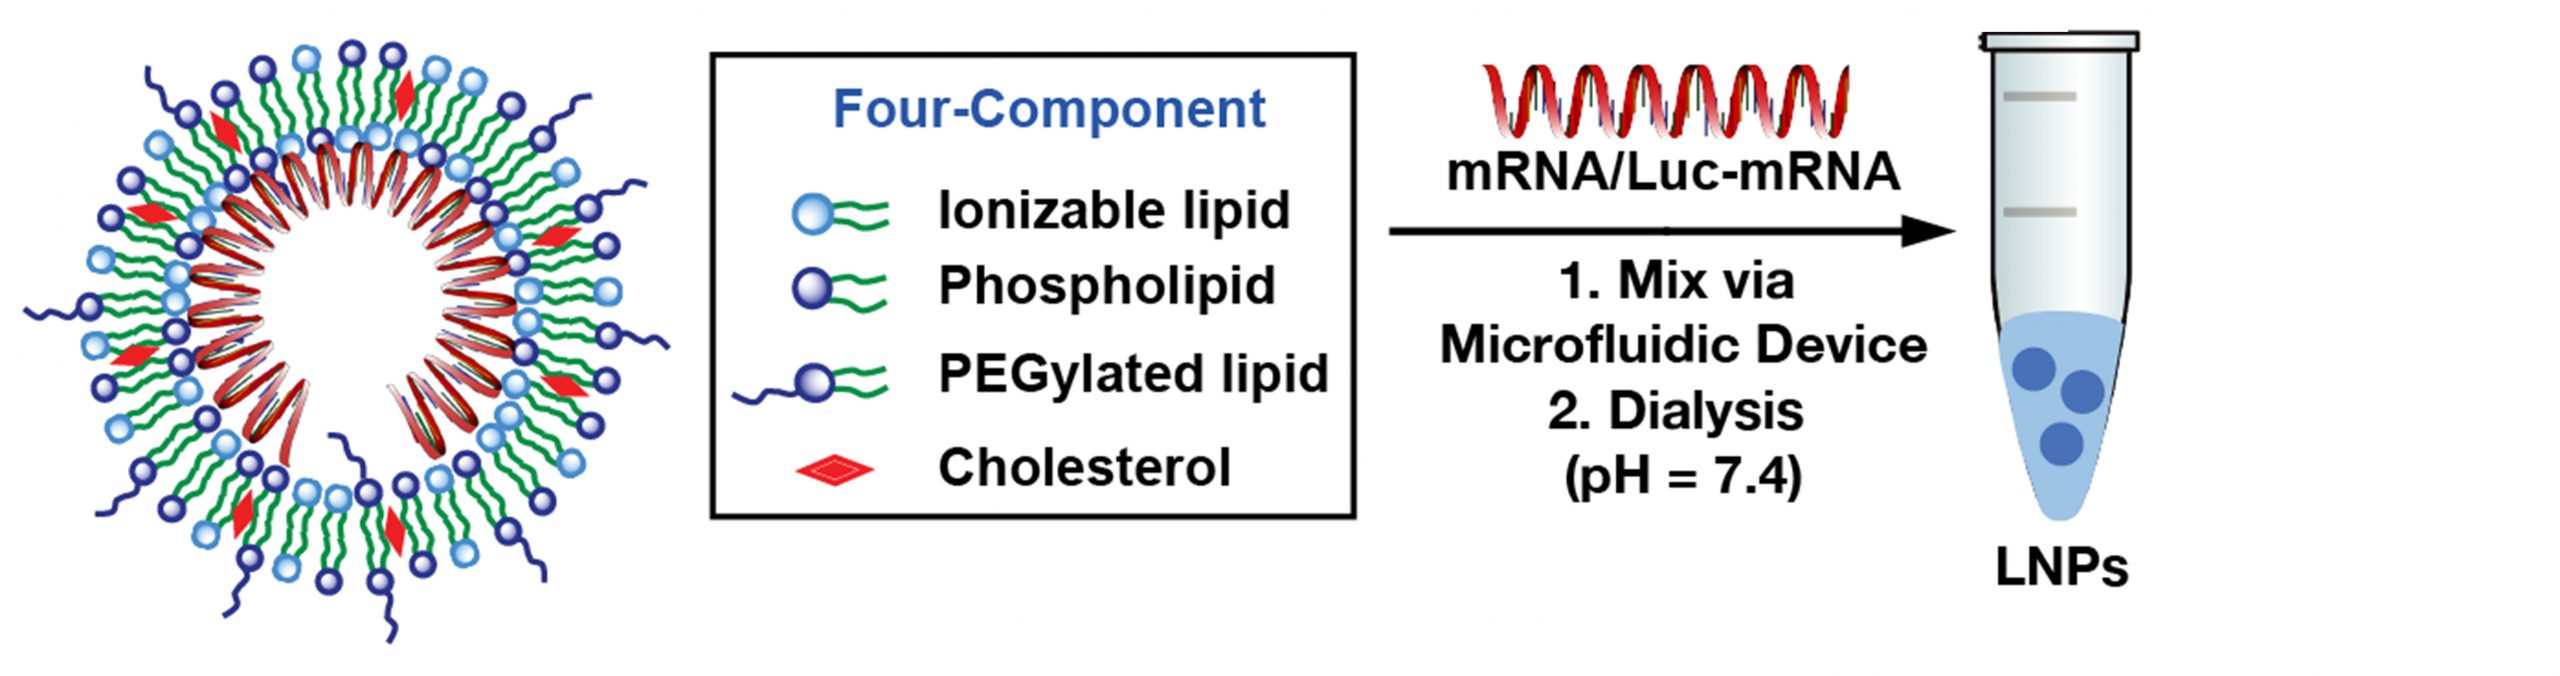 Four-component Ionizable Lipid Nanoparticle (LNP) for mRNA vaccines